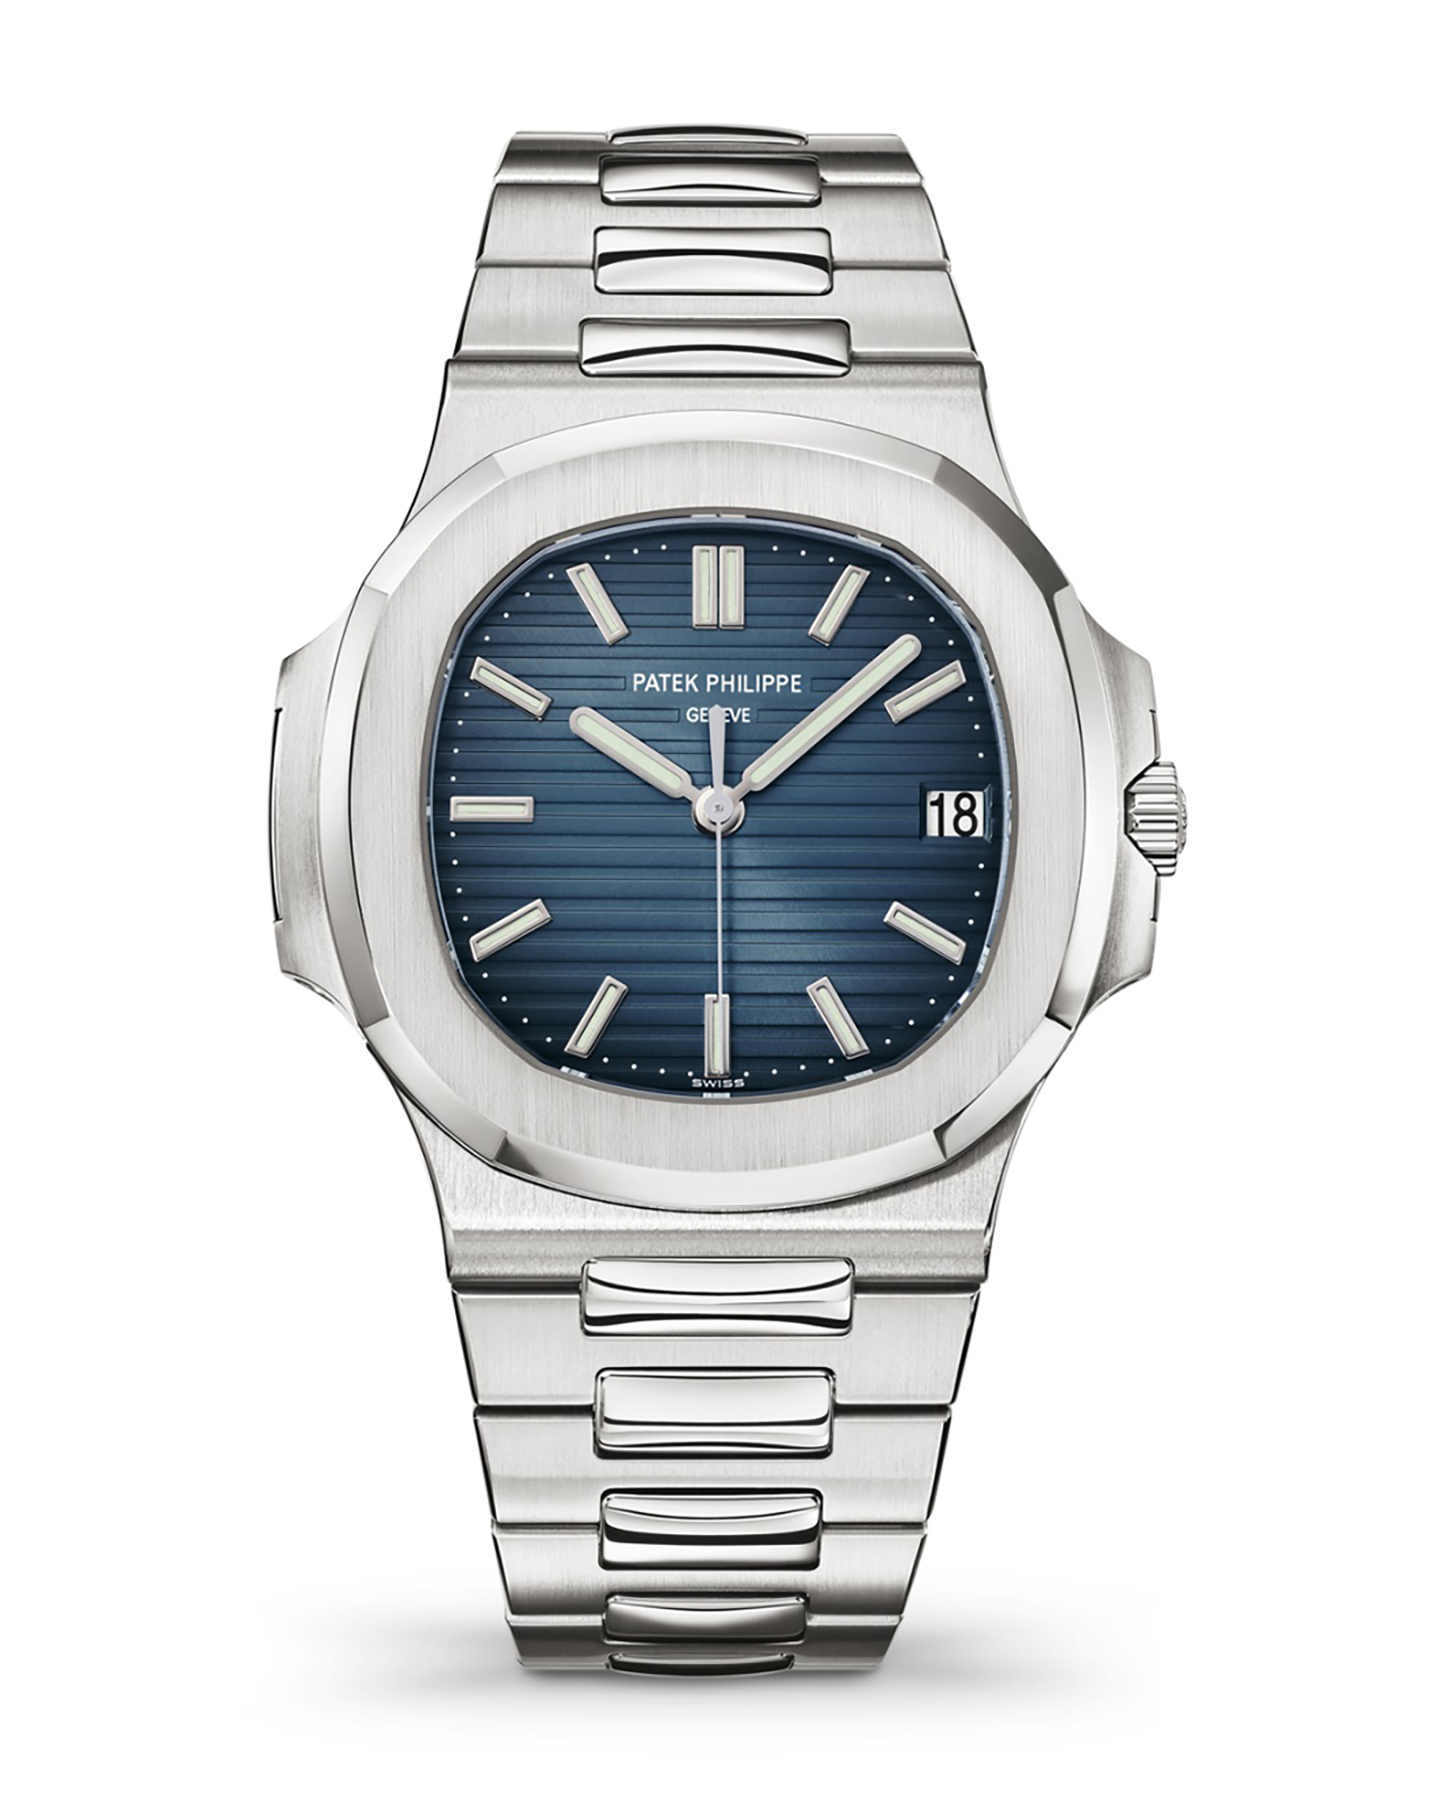 Strategies to Enhance Your Chances of Owning a Patek Philippe Timepiece